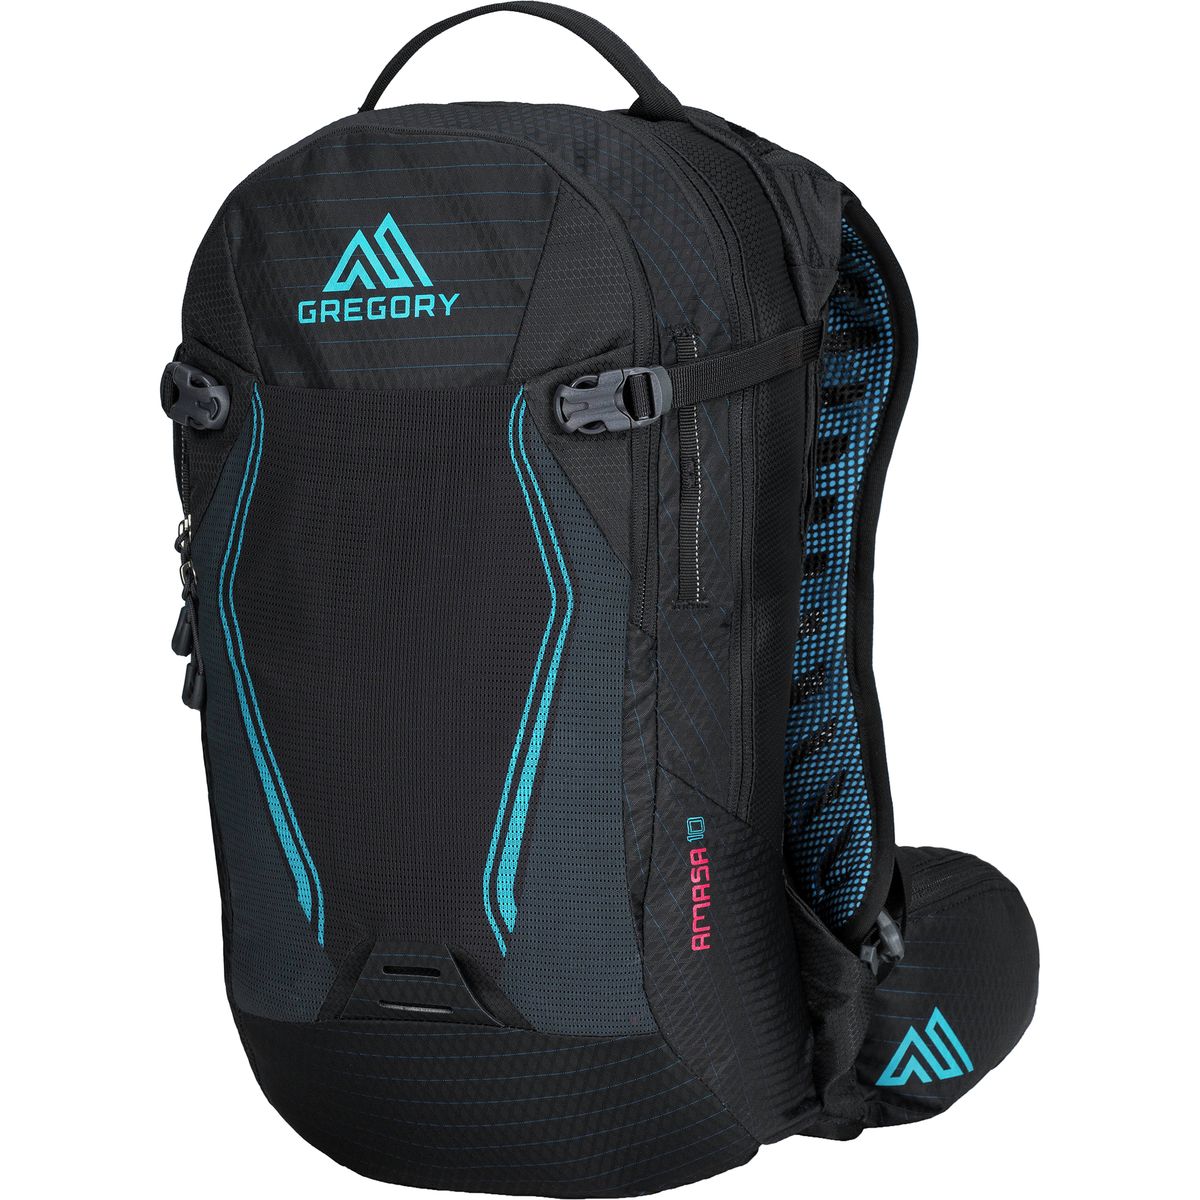 Gregory Amasa 10 Hydration Backpack Womens 610cu in